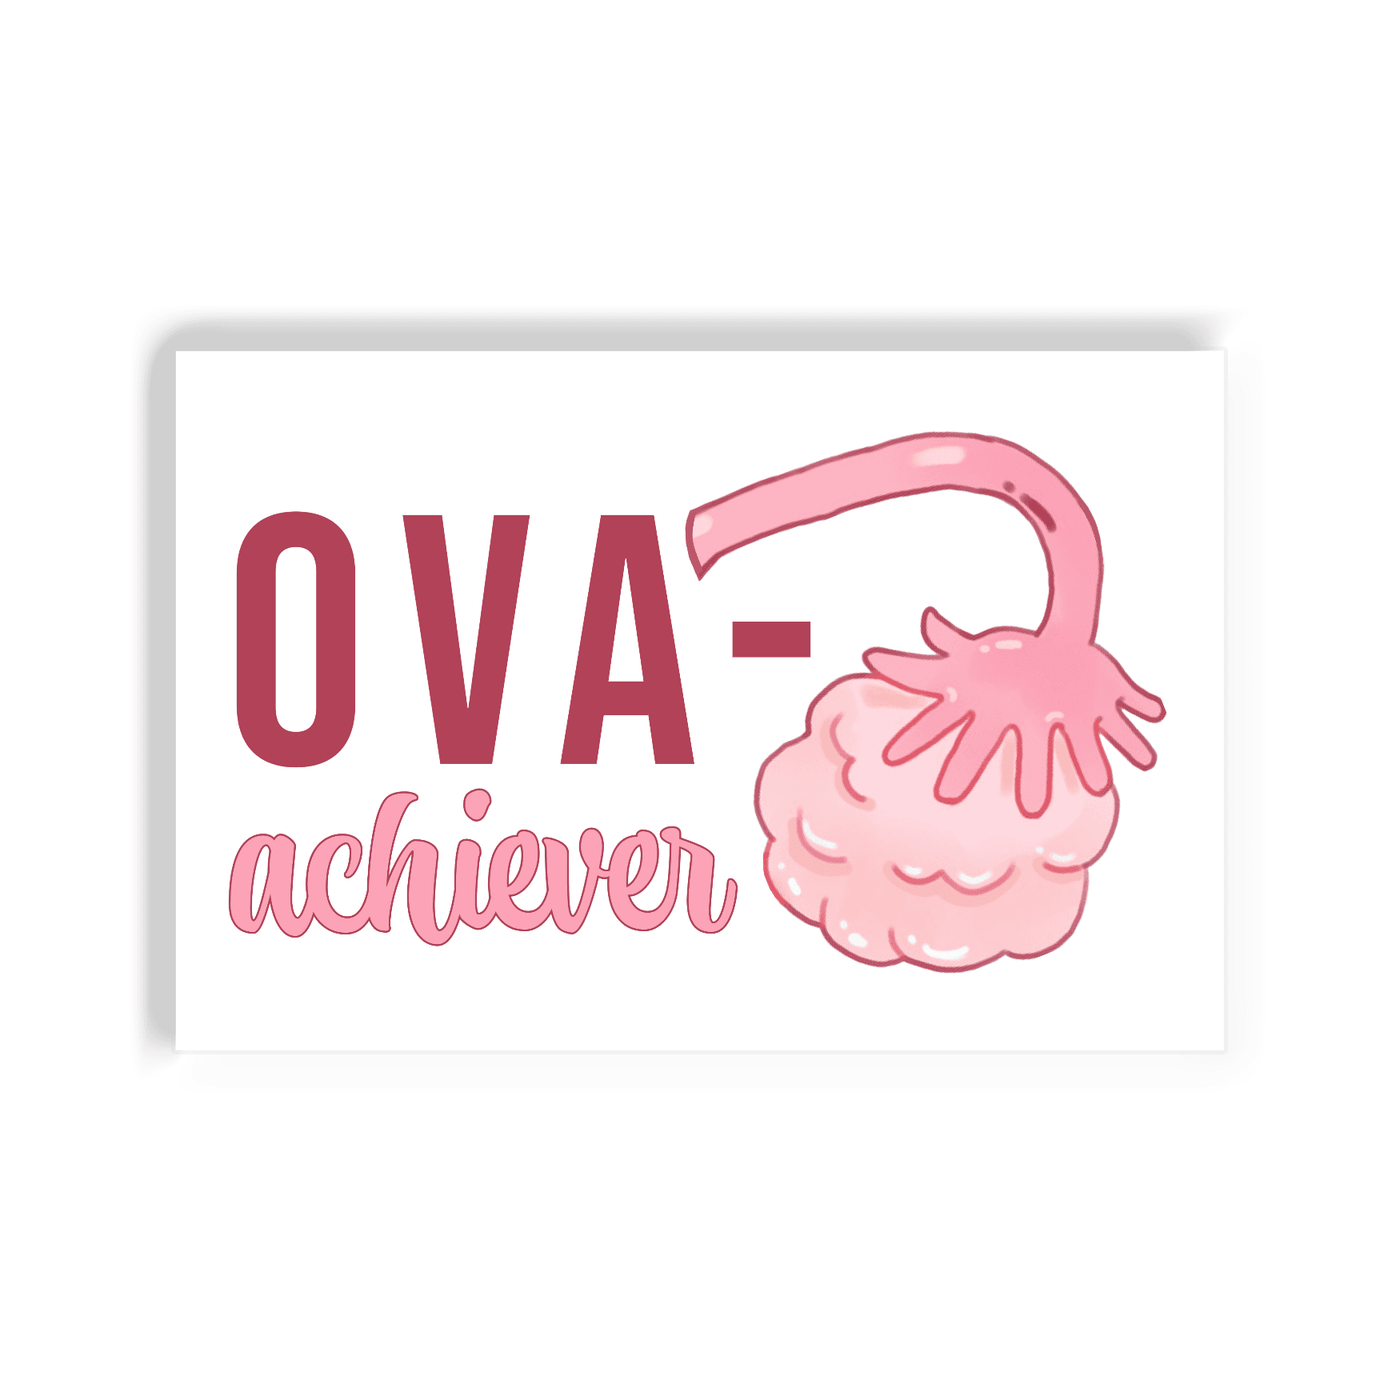 2x3 colorful magnet with image of an ovary with text that says ova-achiever